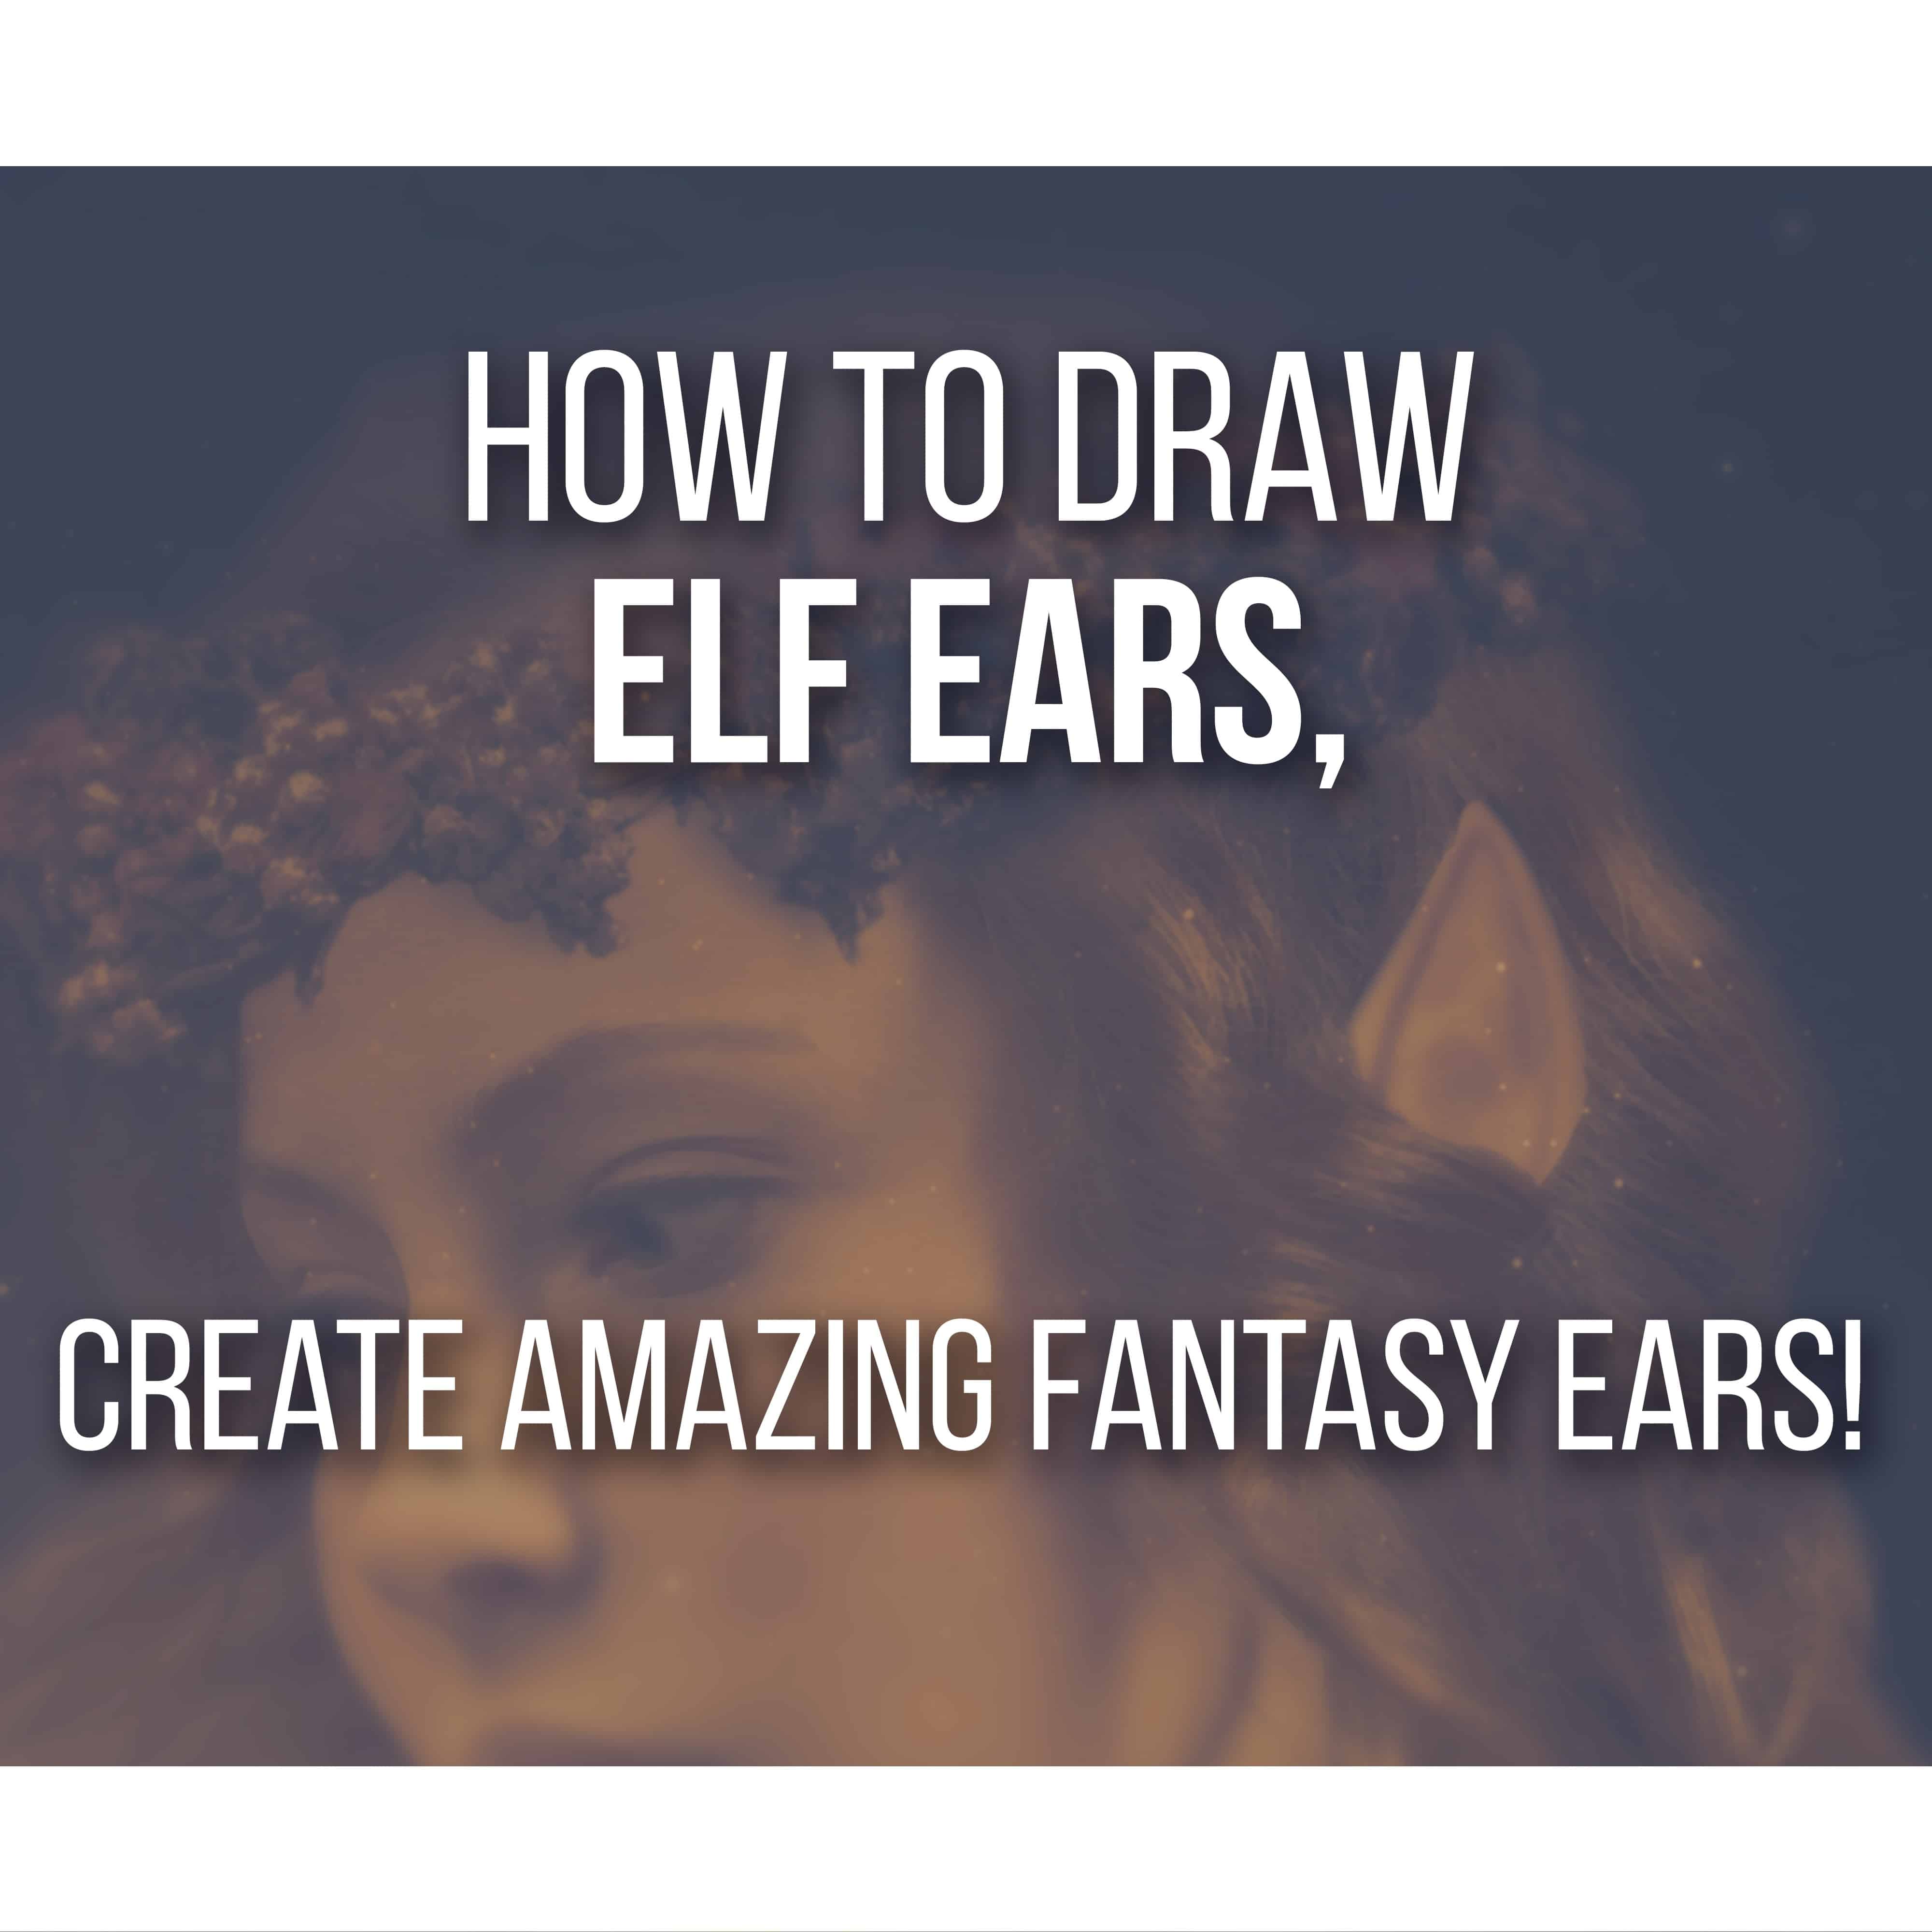 How to Draw Beautiful Elf Ears Step by Step (with Video!)